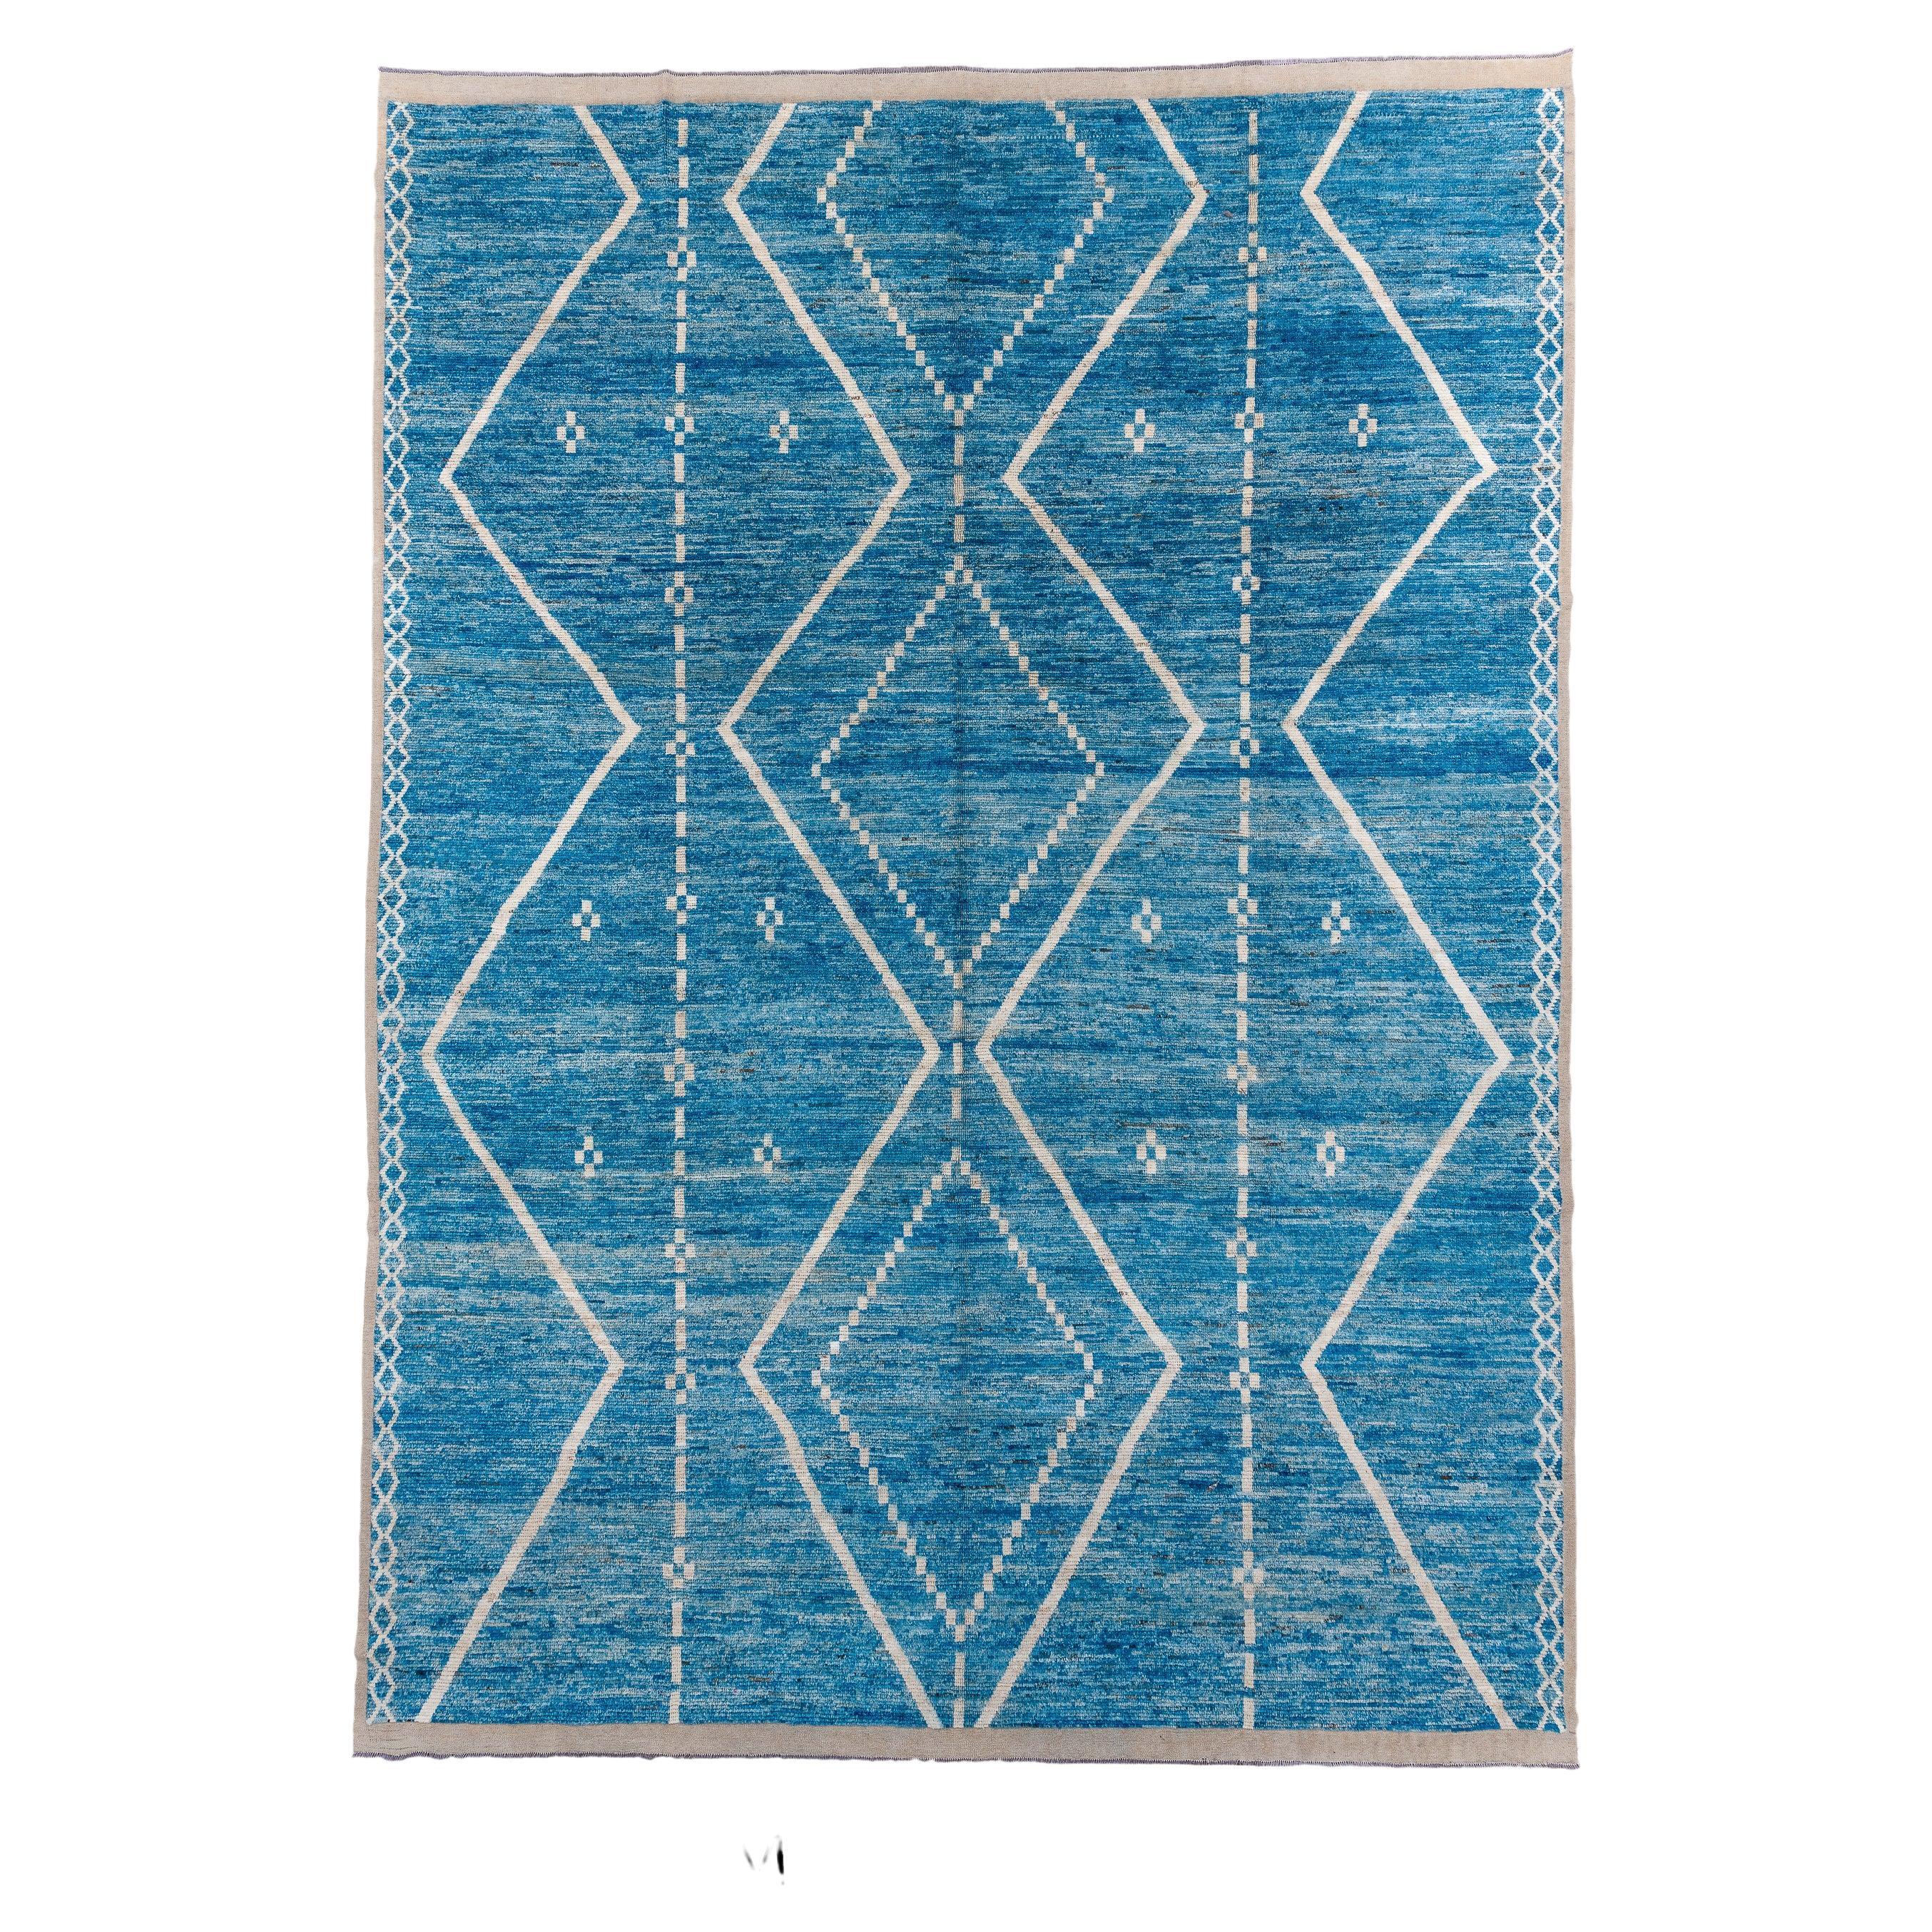 New and Modern Moroccan Design Rug